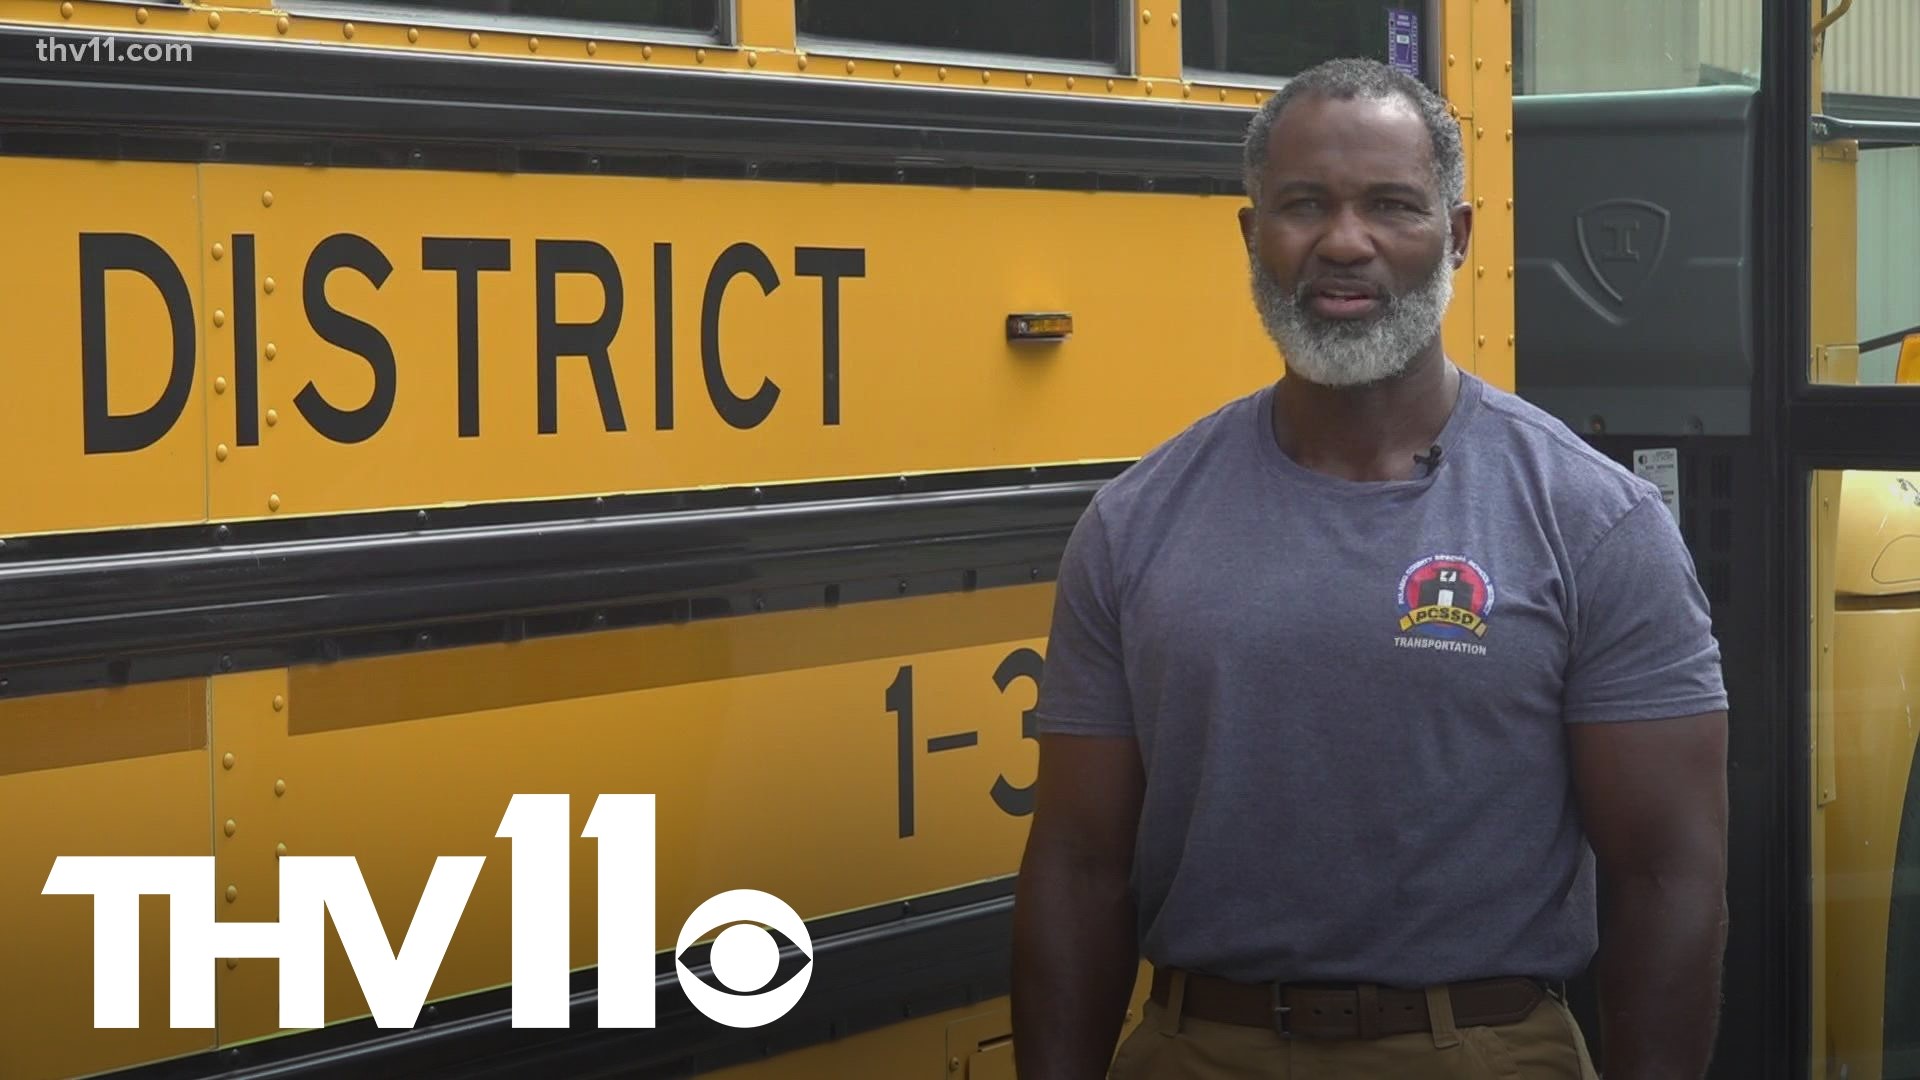 Schools throughout Arkansas have spent summer break dealing with the bus driver shortage. And now, some districts are closer to having a full staff of drivers.